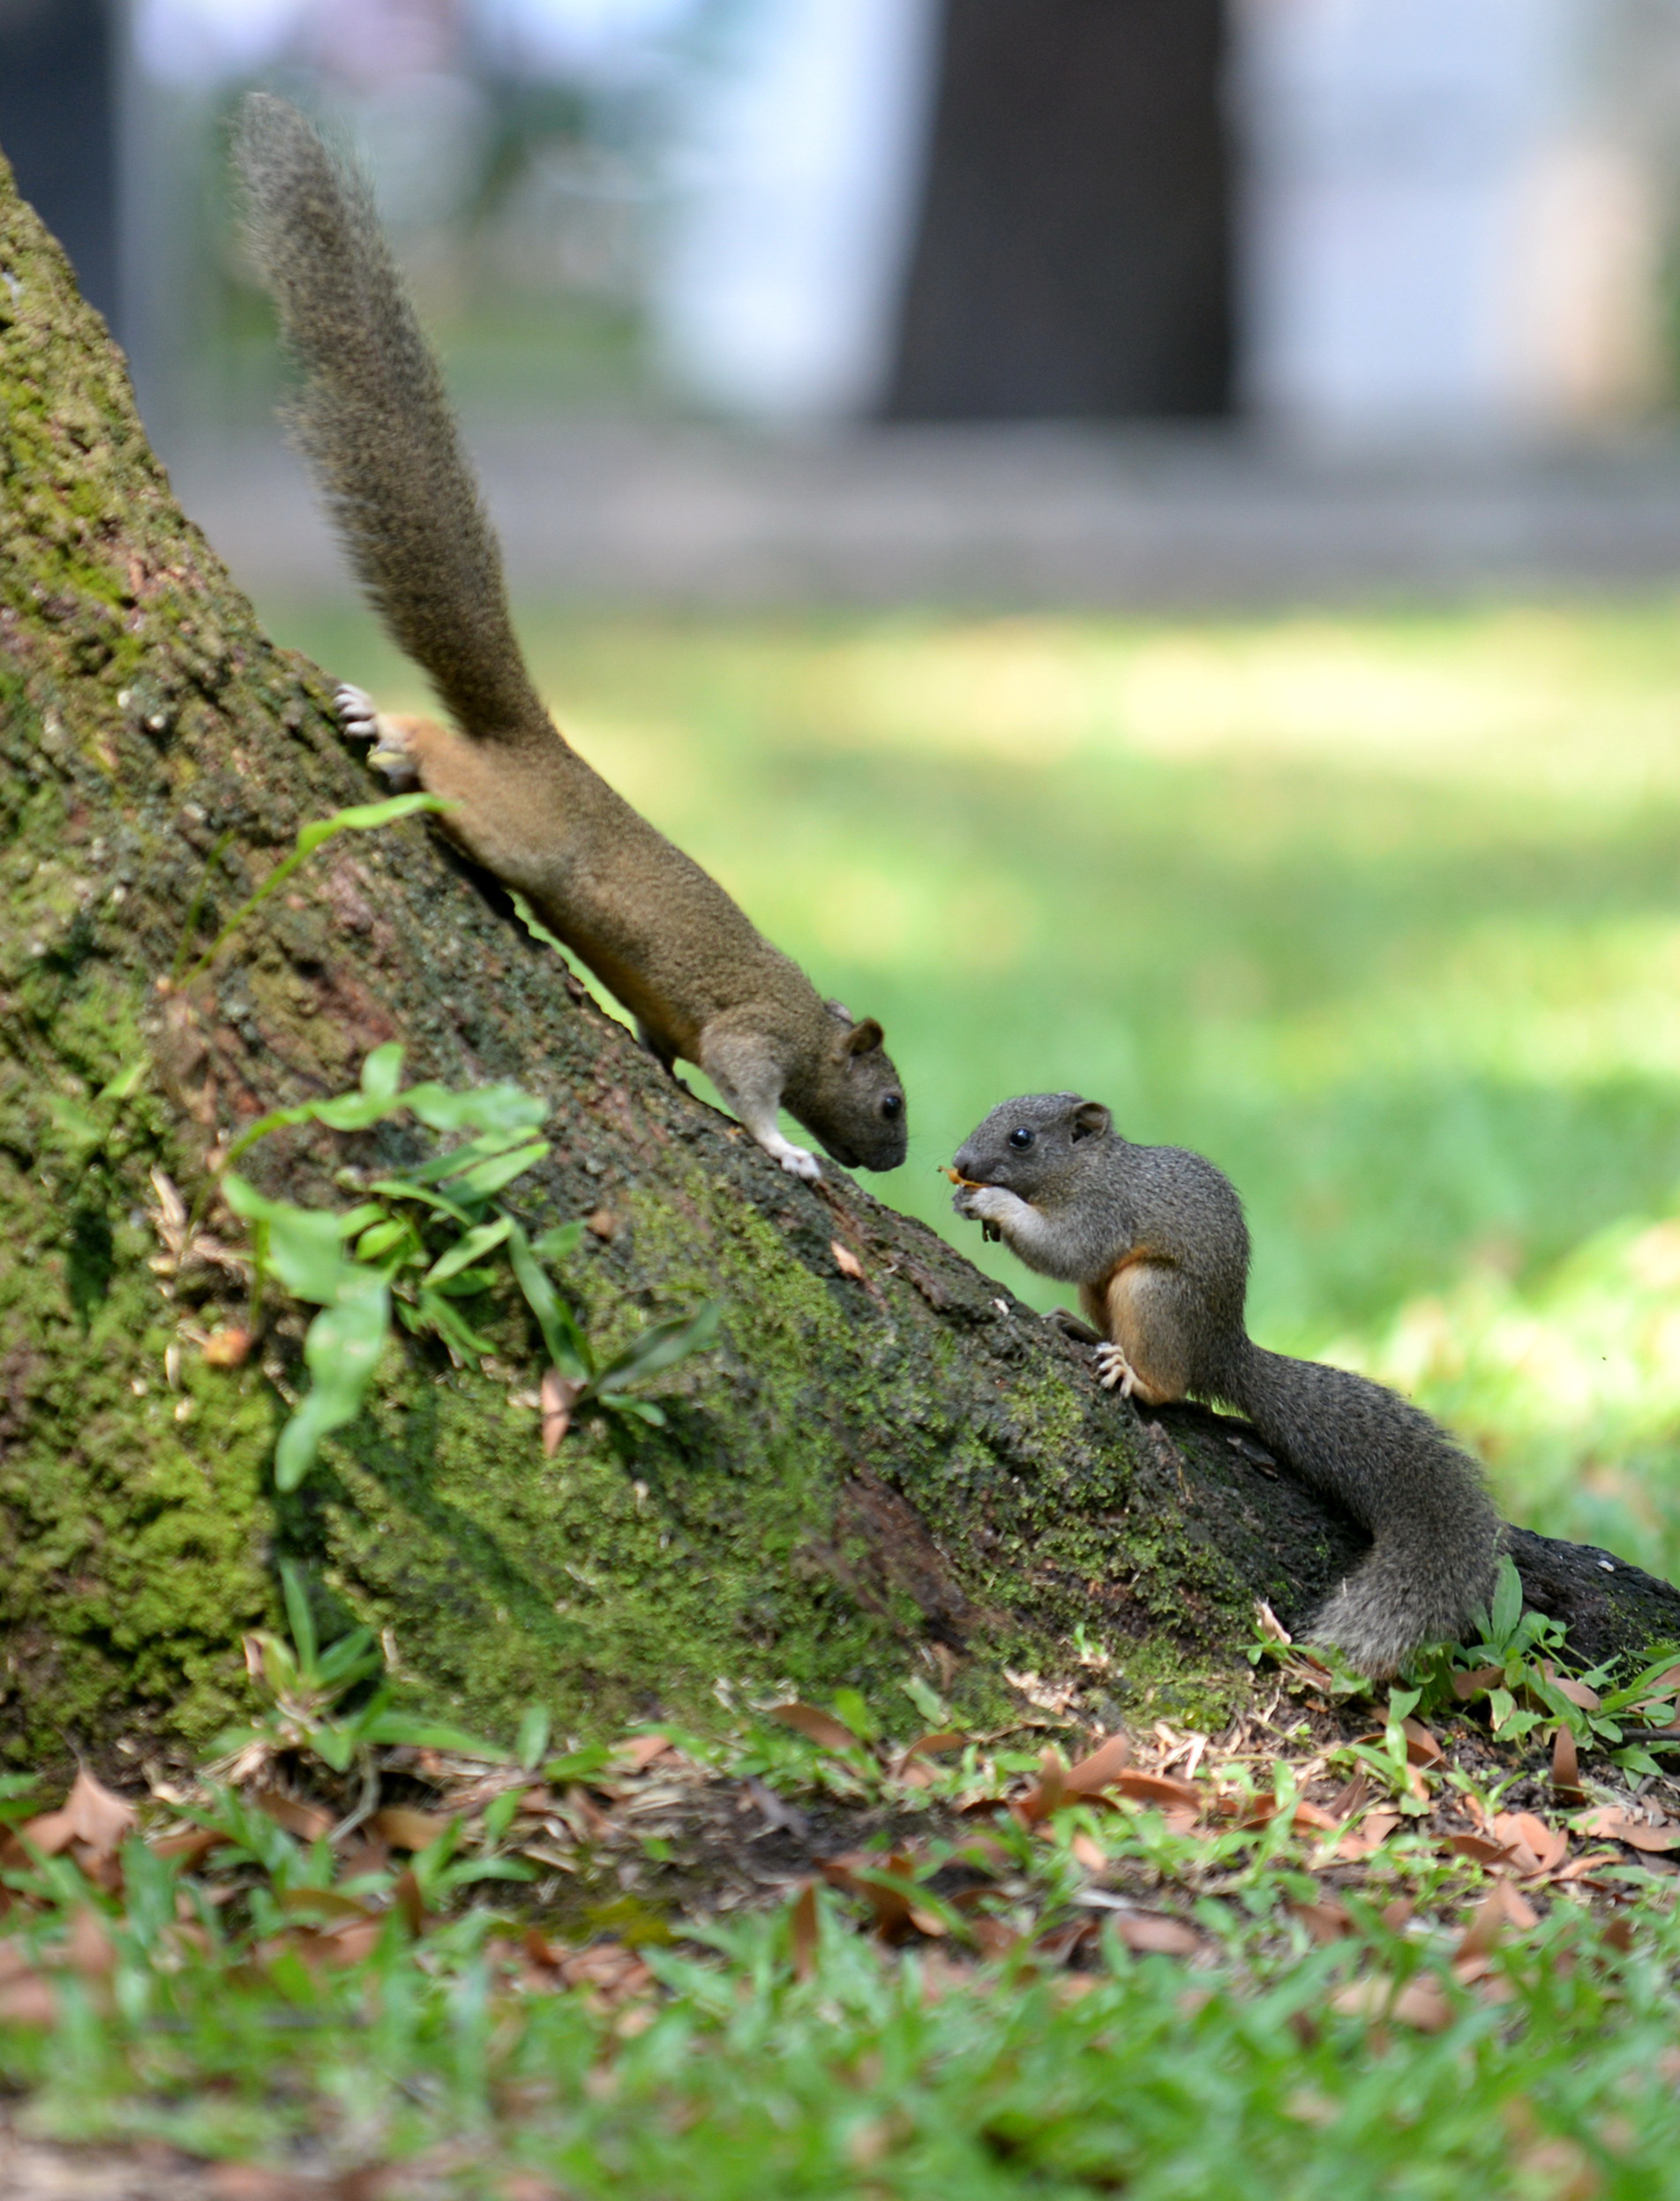 Two squirrels are seen in April 30 Park in Ho Chi Minh City, Vietnam. Photo: T.T.D. / Tuoi Tre